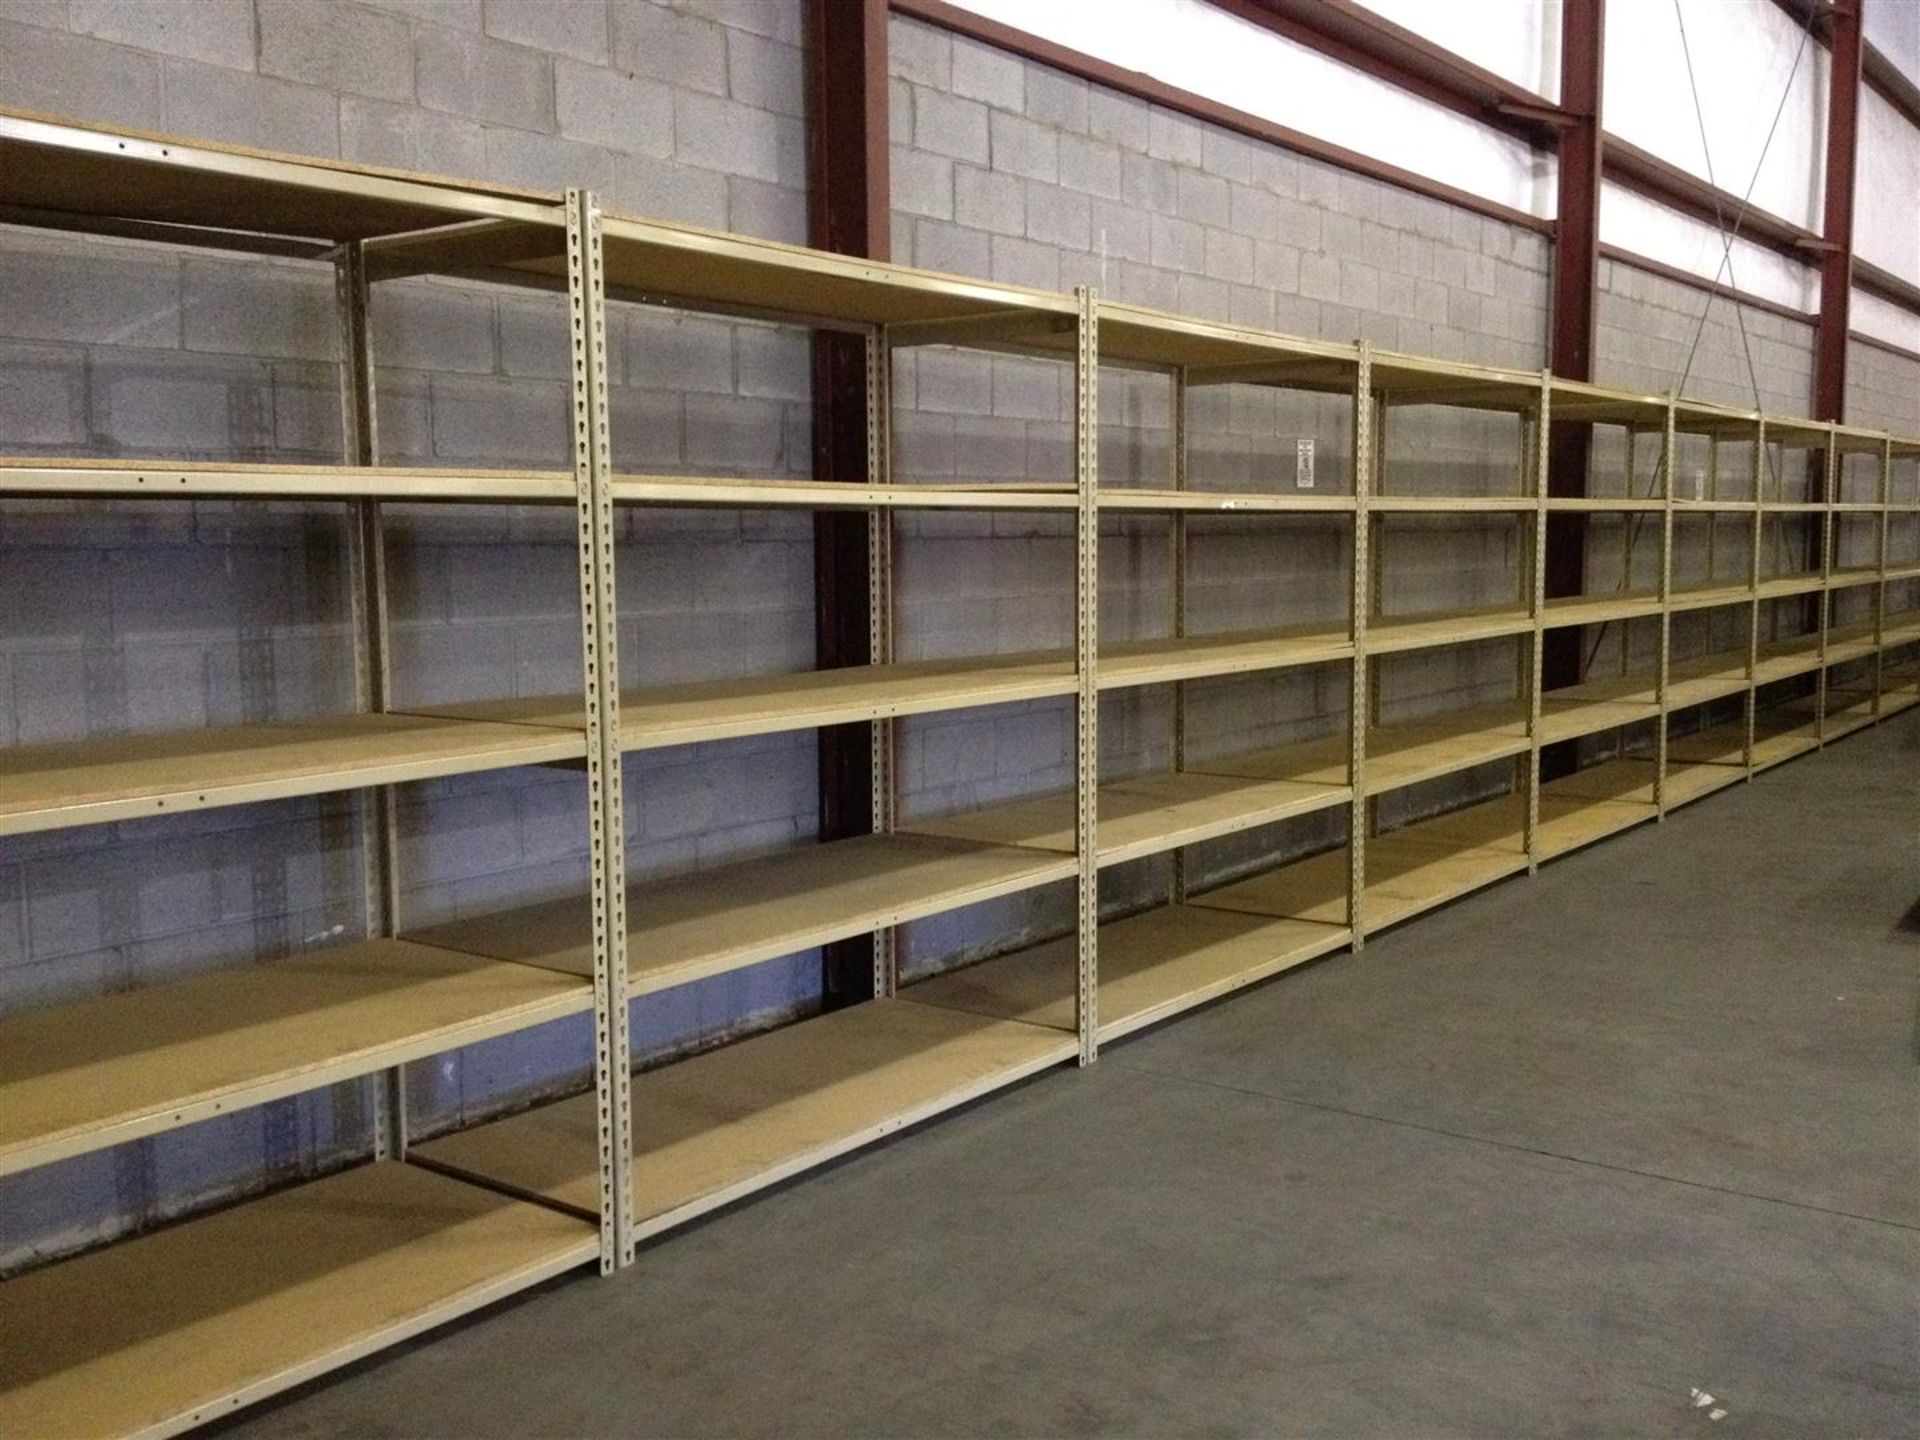 10 SECTIONS OF RIVETIER INDUSTRIAL SHELVING,  EACH SIZE 28"D X 65"W X 84"H, COLOR: MANILA, 5 SHELVES - Image 3 of 5